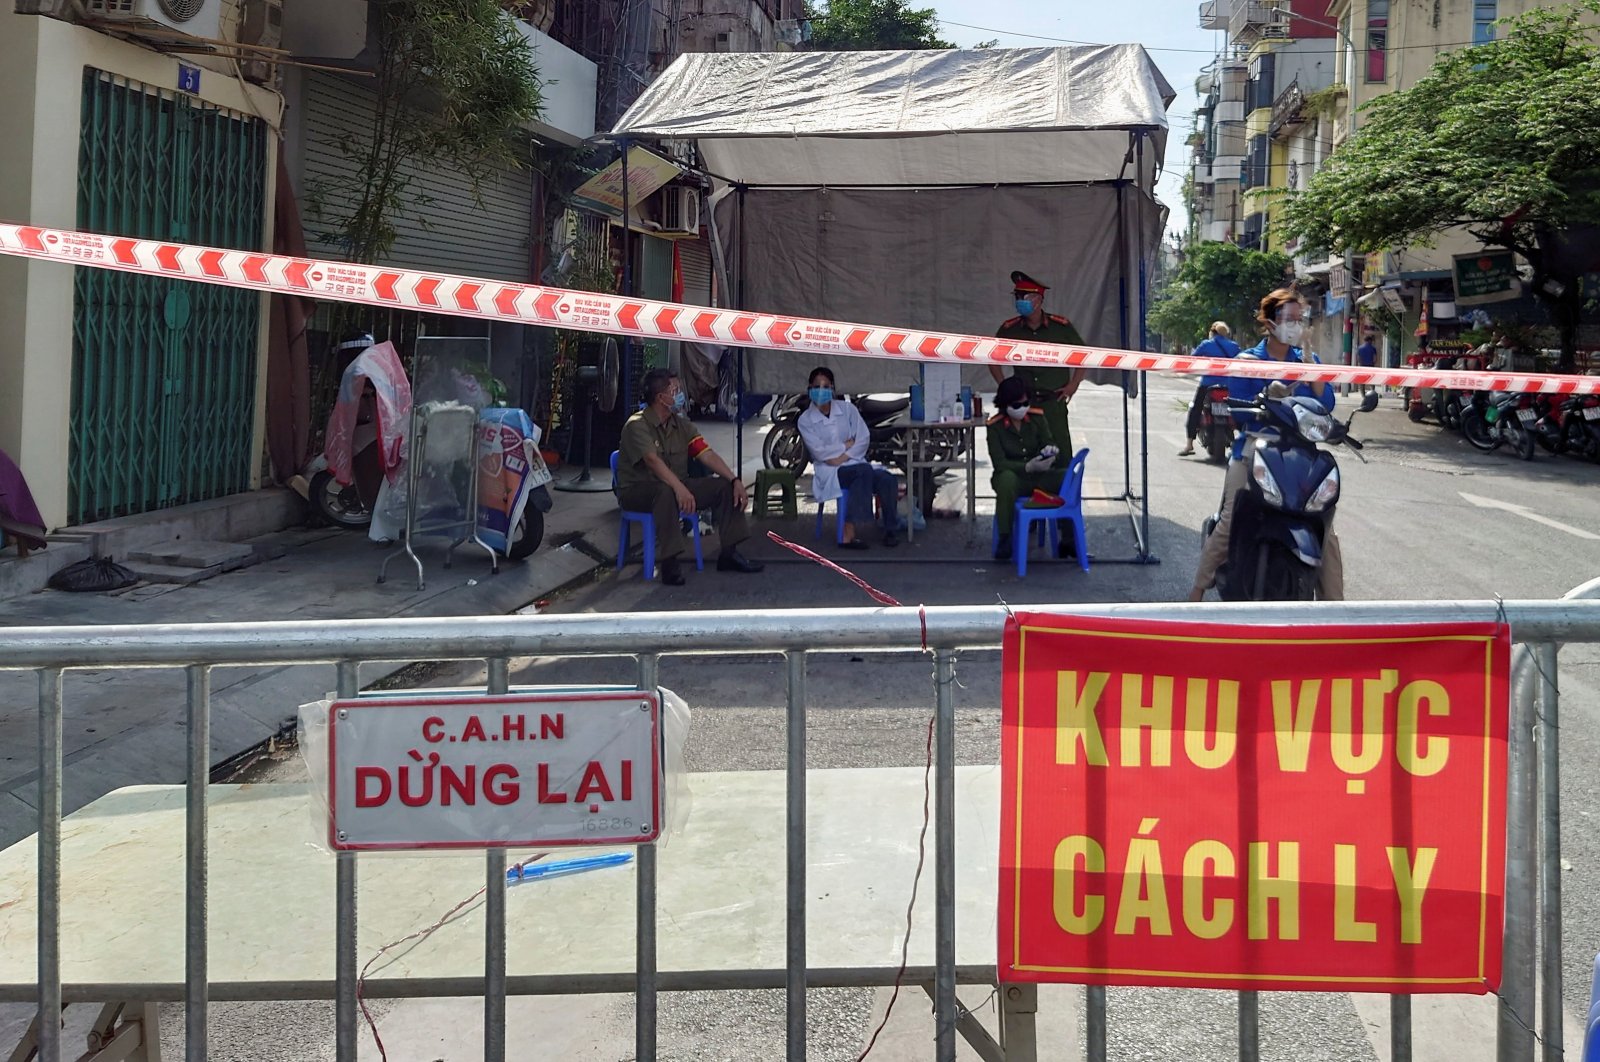 Signs reading "Hanoi Police - Stop" and "Quarantine Area" are seen next to a street barricade set up as the country imposes measures to prevent the spread of the coronavirus disease (COVID-19), in Hanoi, Vietnam, Aug. 22, 2021. (REUTERS Photo)